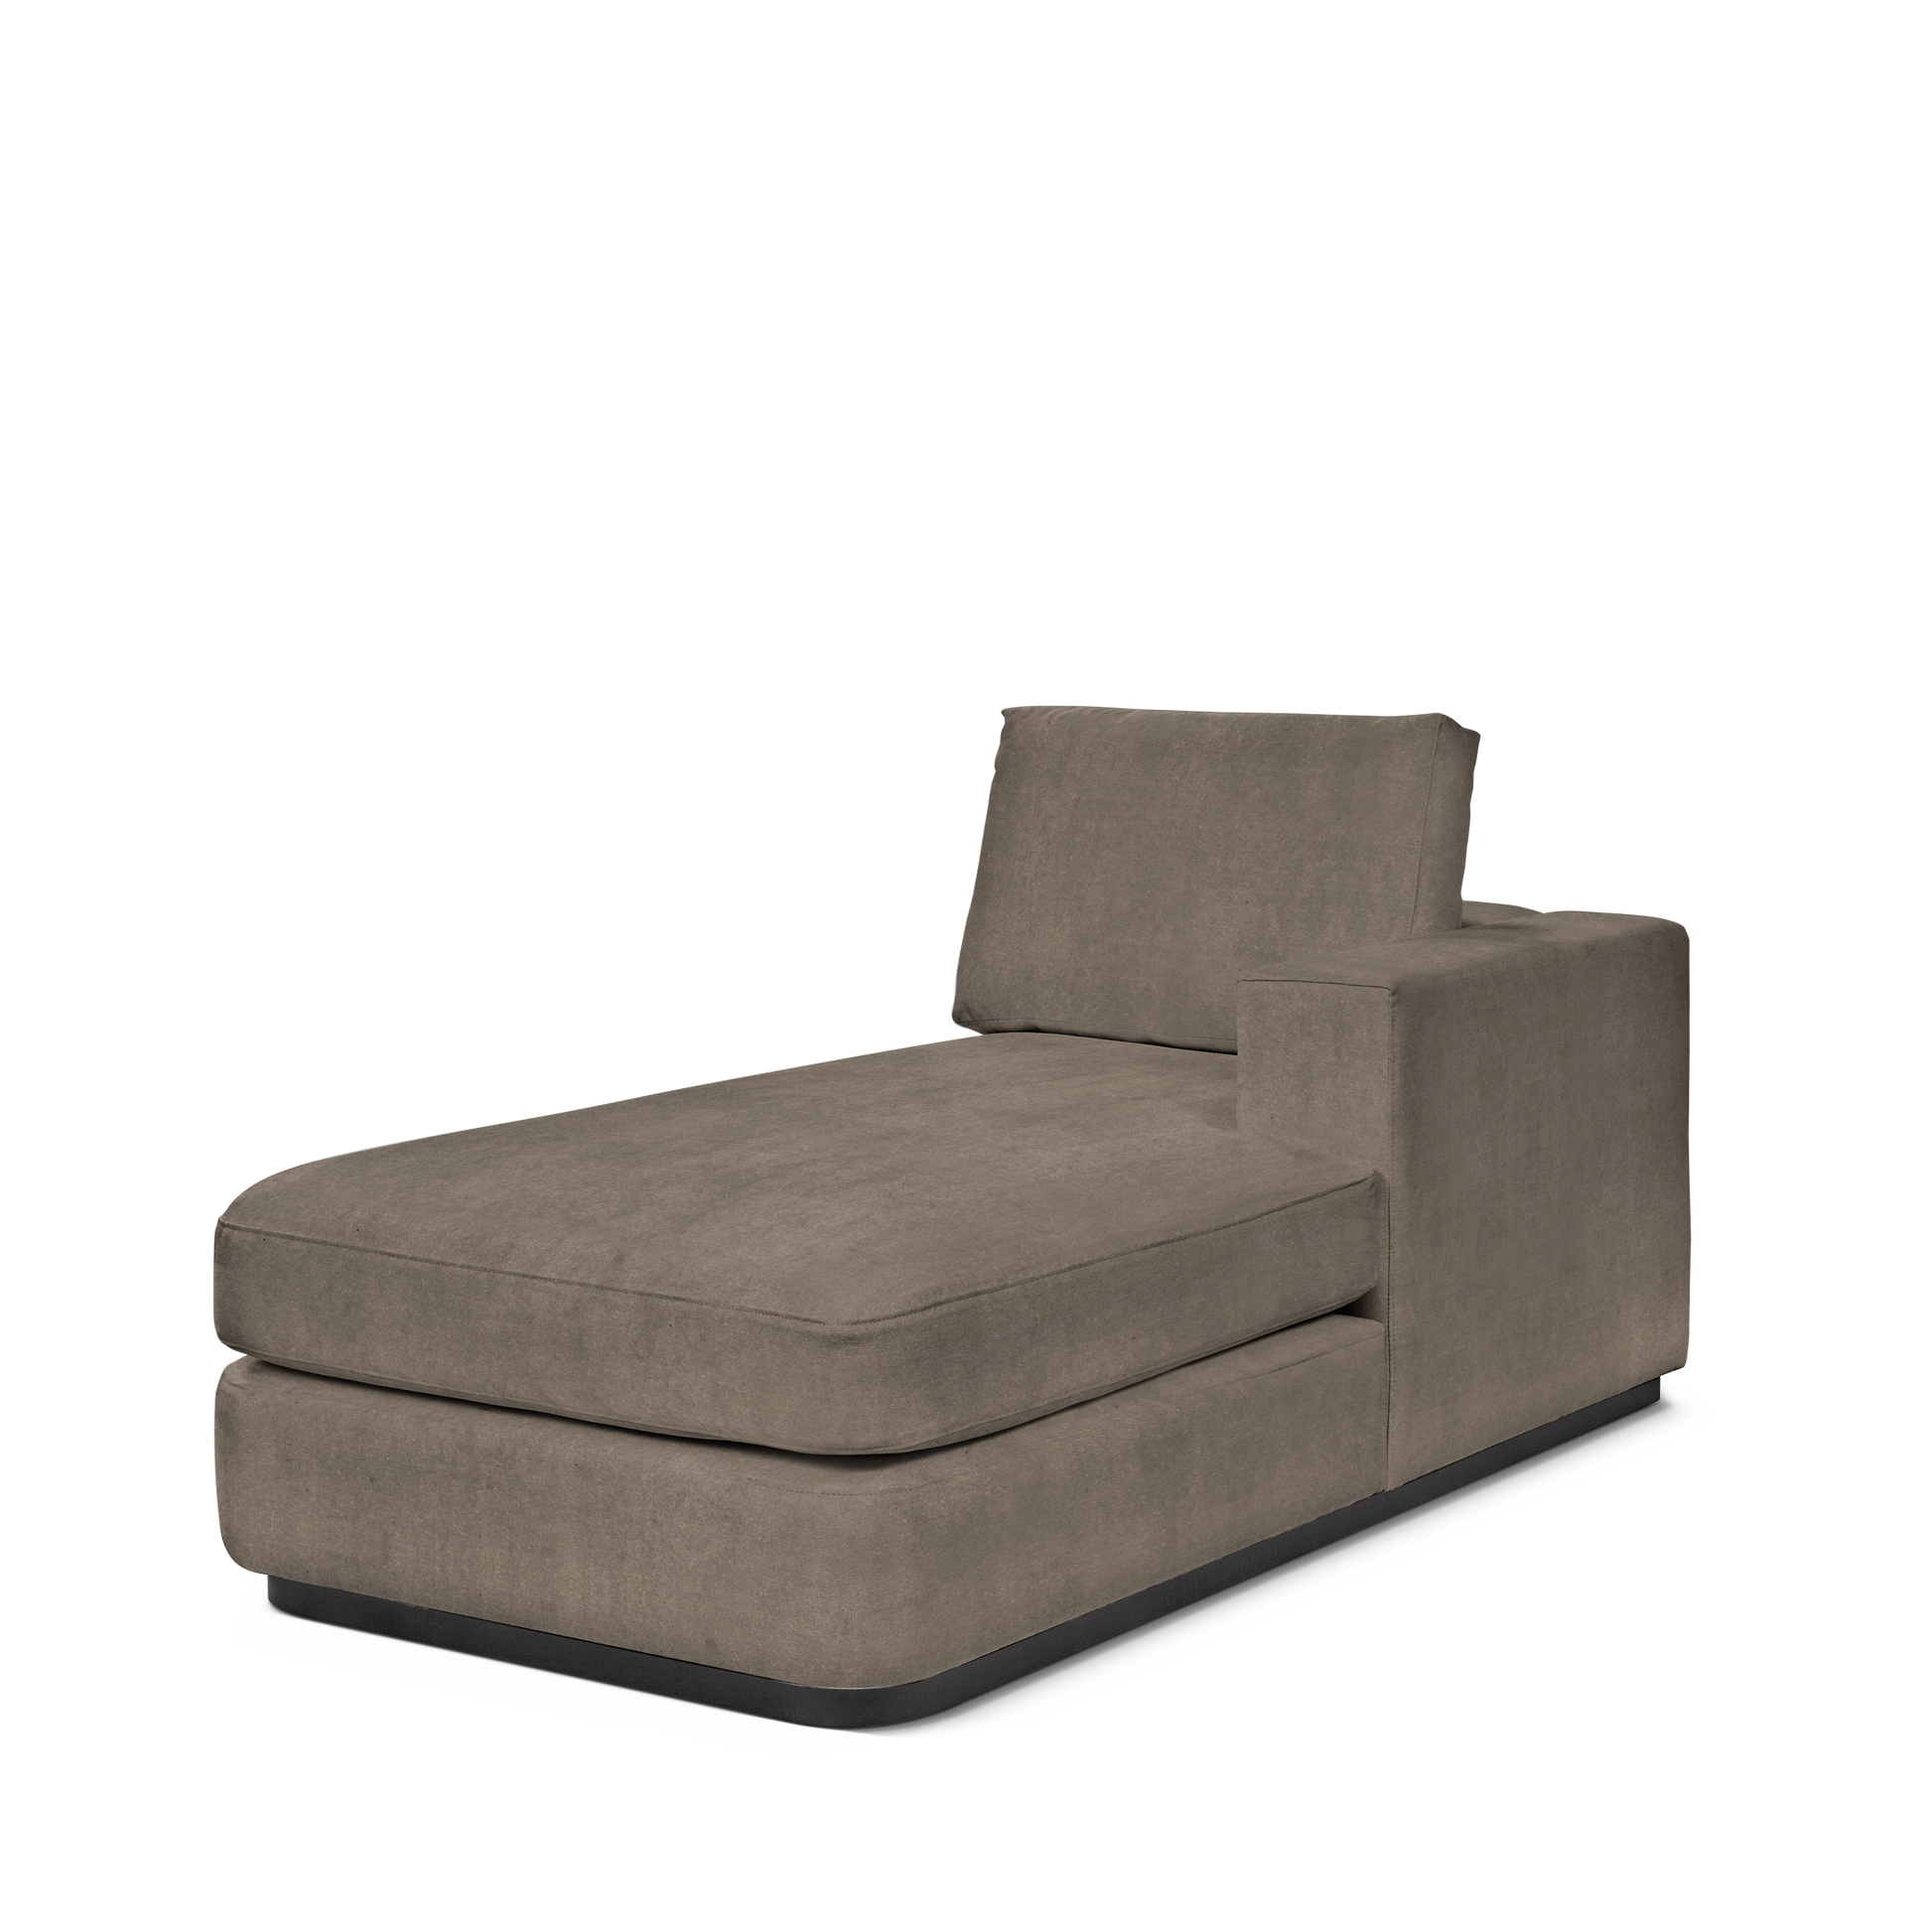 ATLAS 90 Lounge Bed arm rest right with suede grey textile